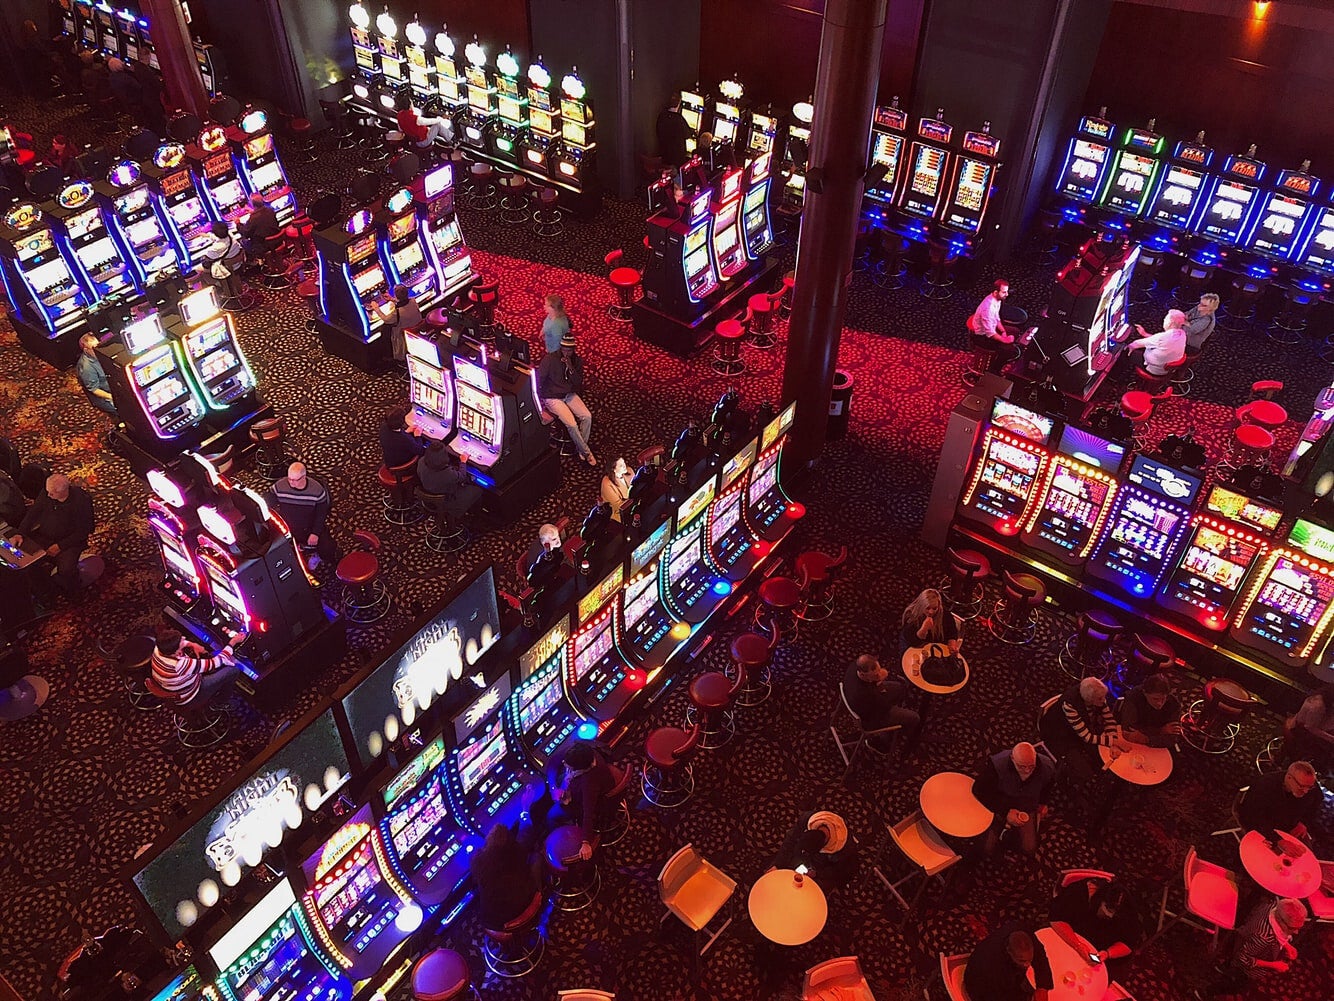 Casinos are intentionally designed to keep people playing for as long as possible - How addictive mobile games hack your brain to drain your wallet